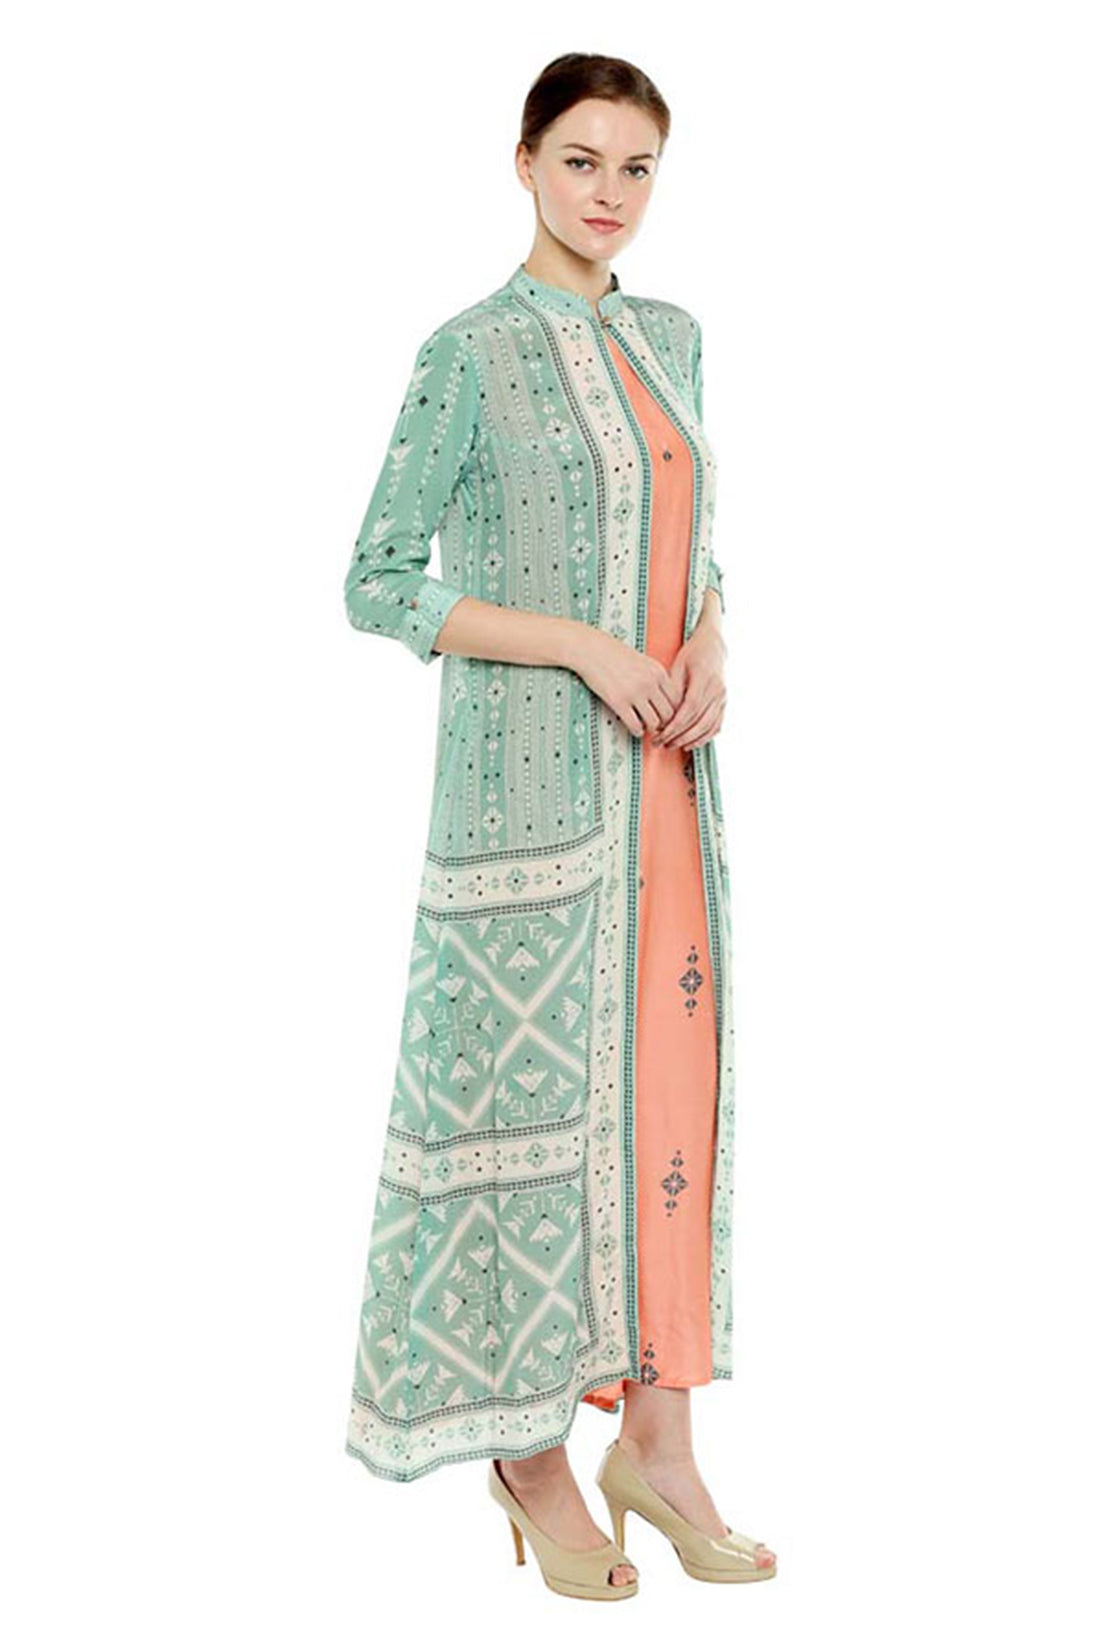 Azulejos Printed Long Dress With Jacket